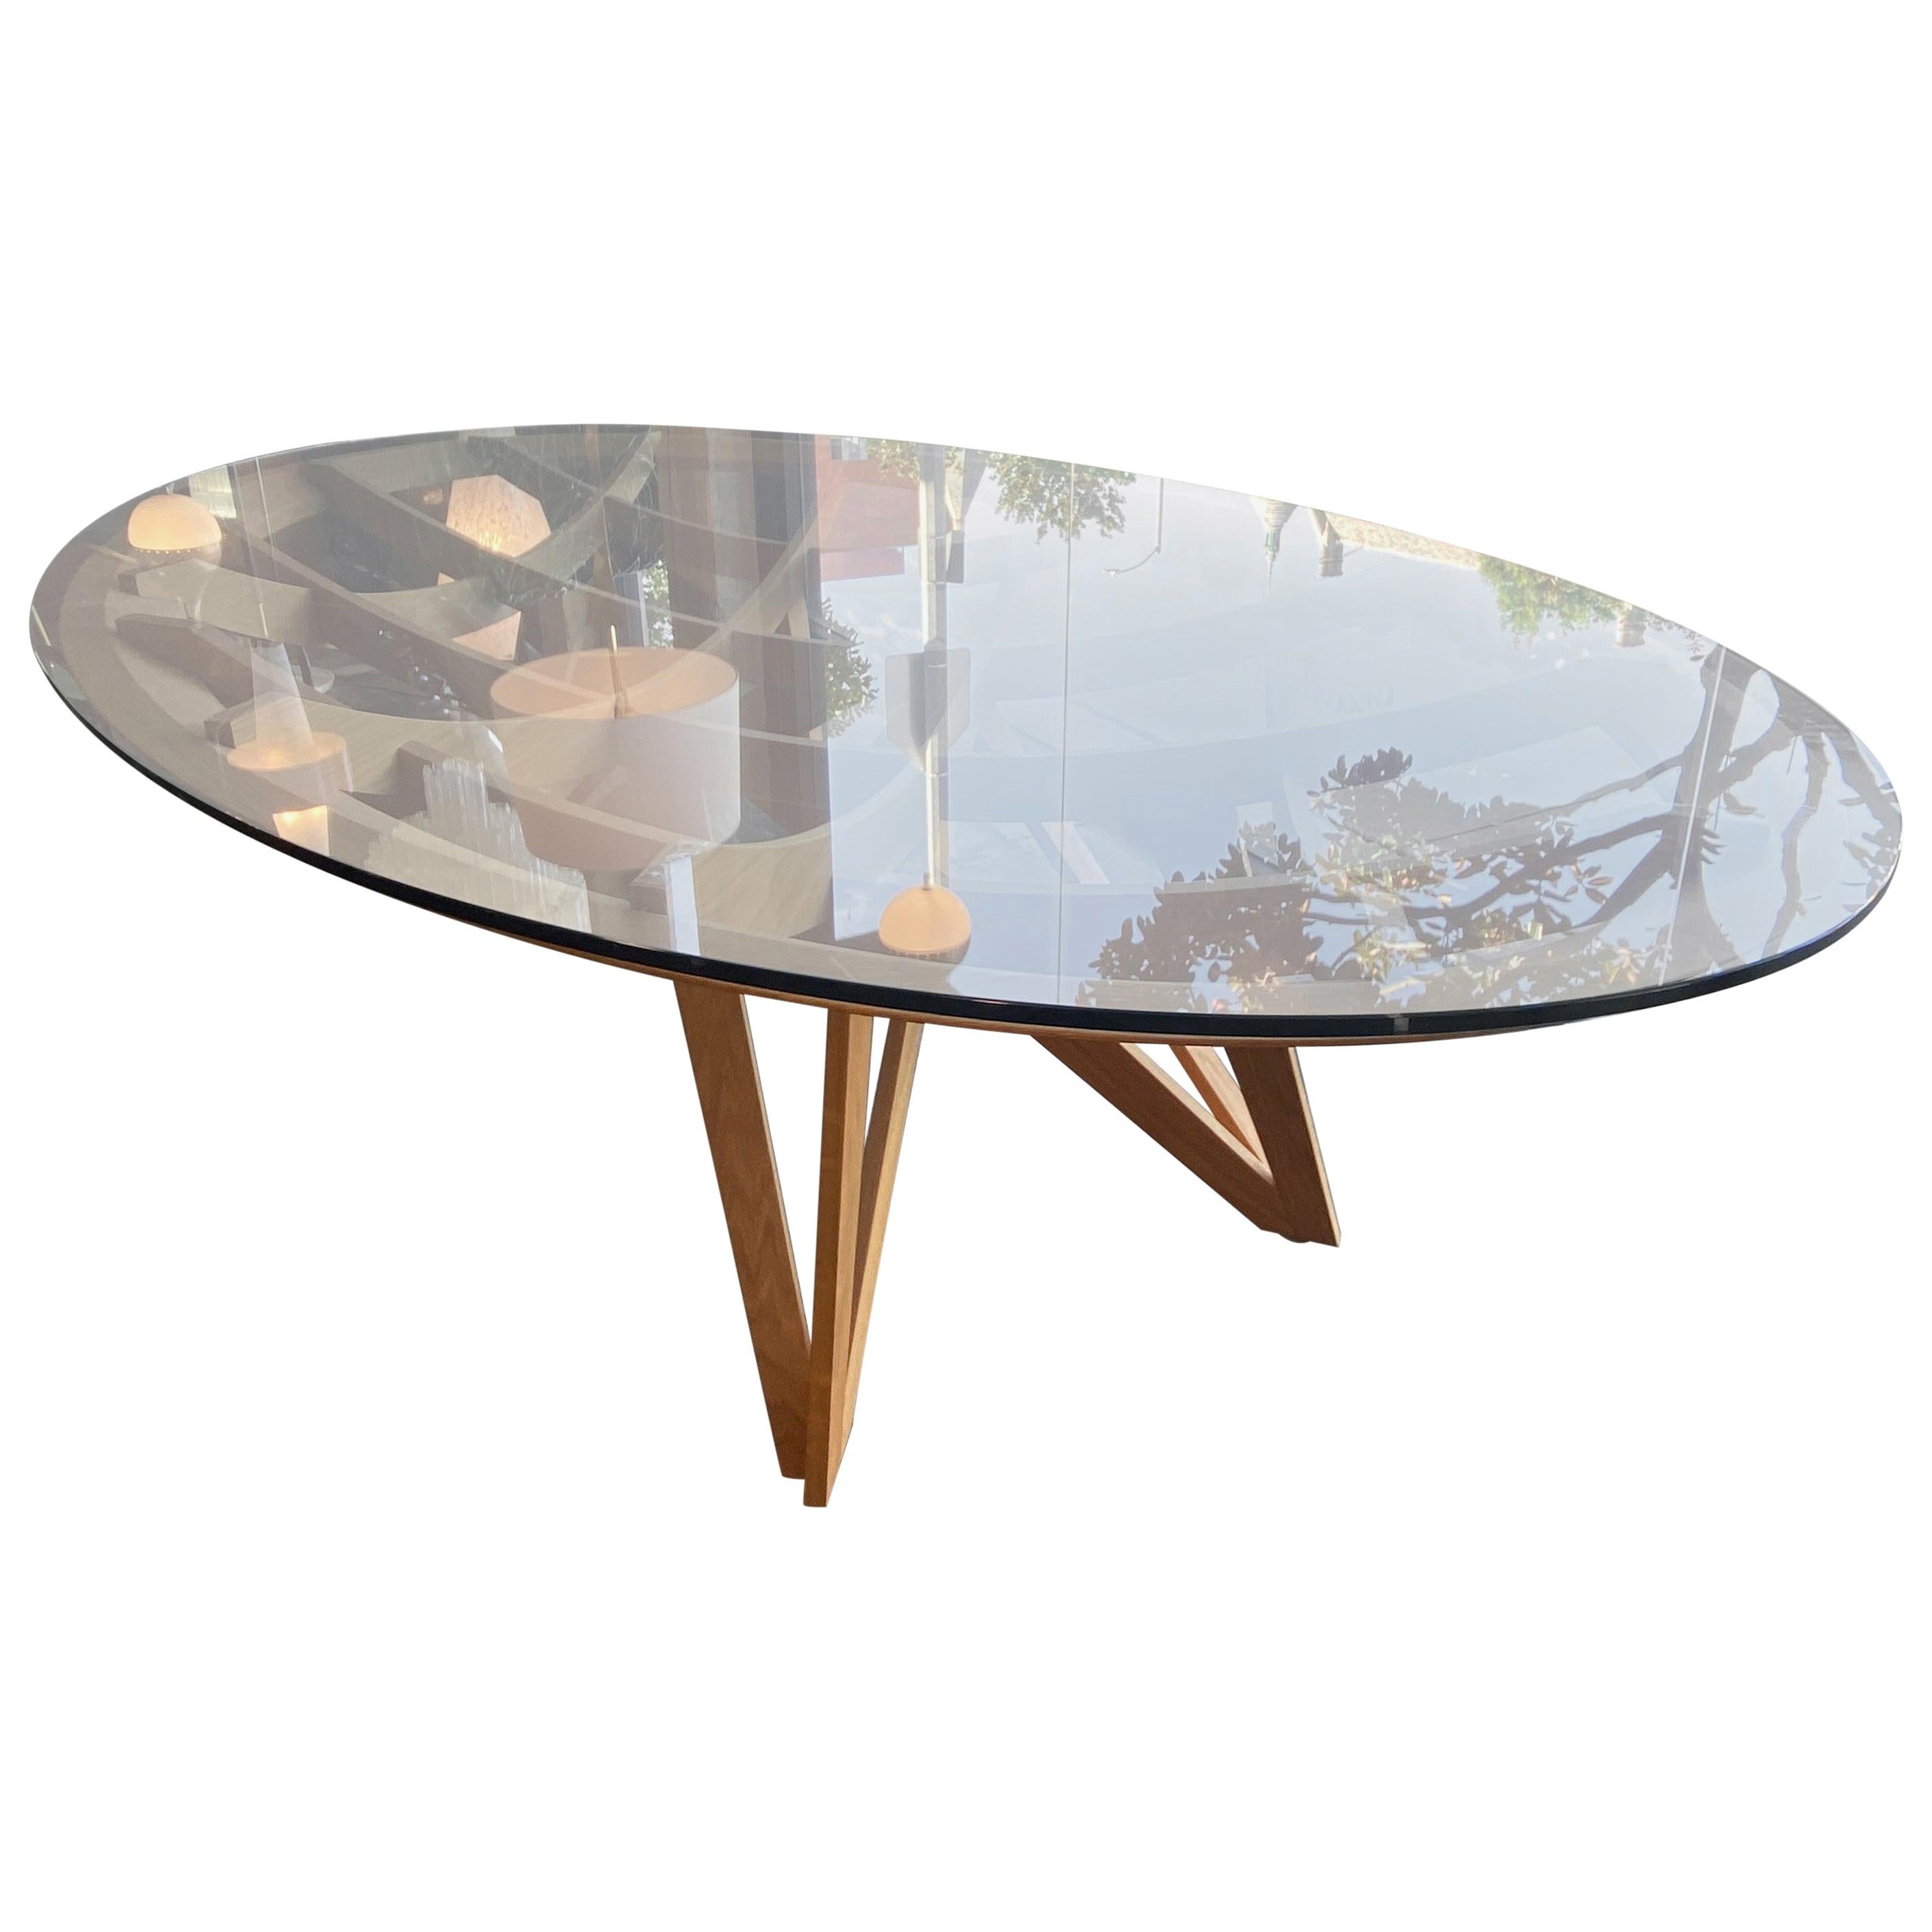 "Opera" Oval Dining Table Drawn by Mario Bellini